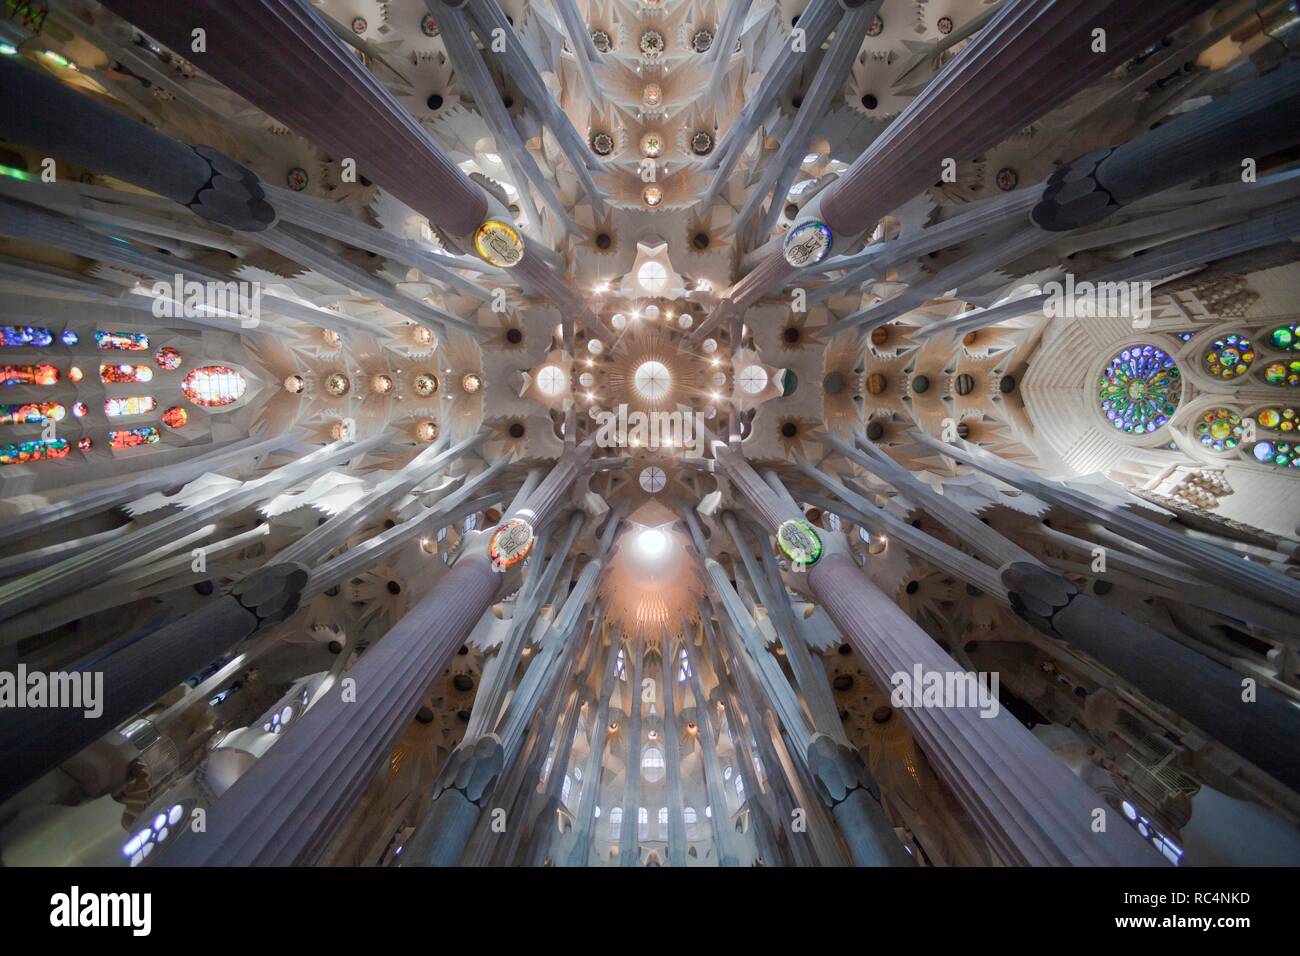 Barcelona, Catalonia, Spain. Basilica of the Sagrada Familia, by Antonio Gaudi (1852-1926). Interior. Central nave. Forms and geometries inspired by nature. Modernist style. Stock Photo